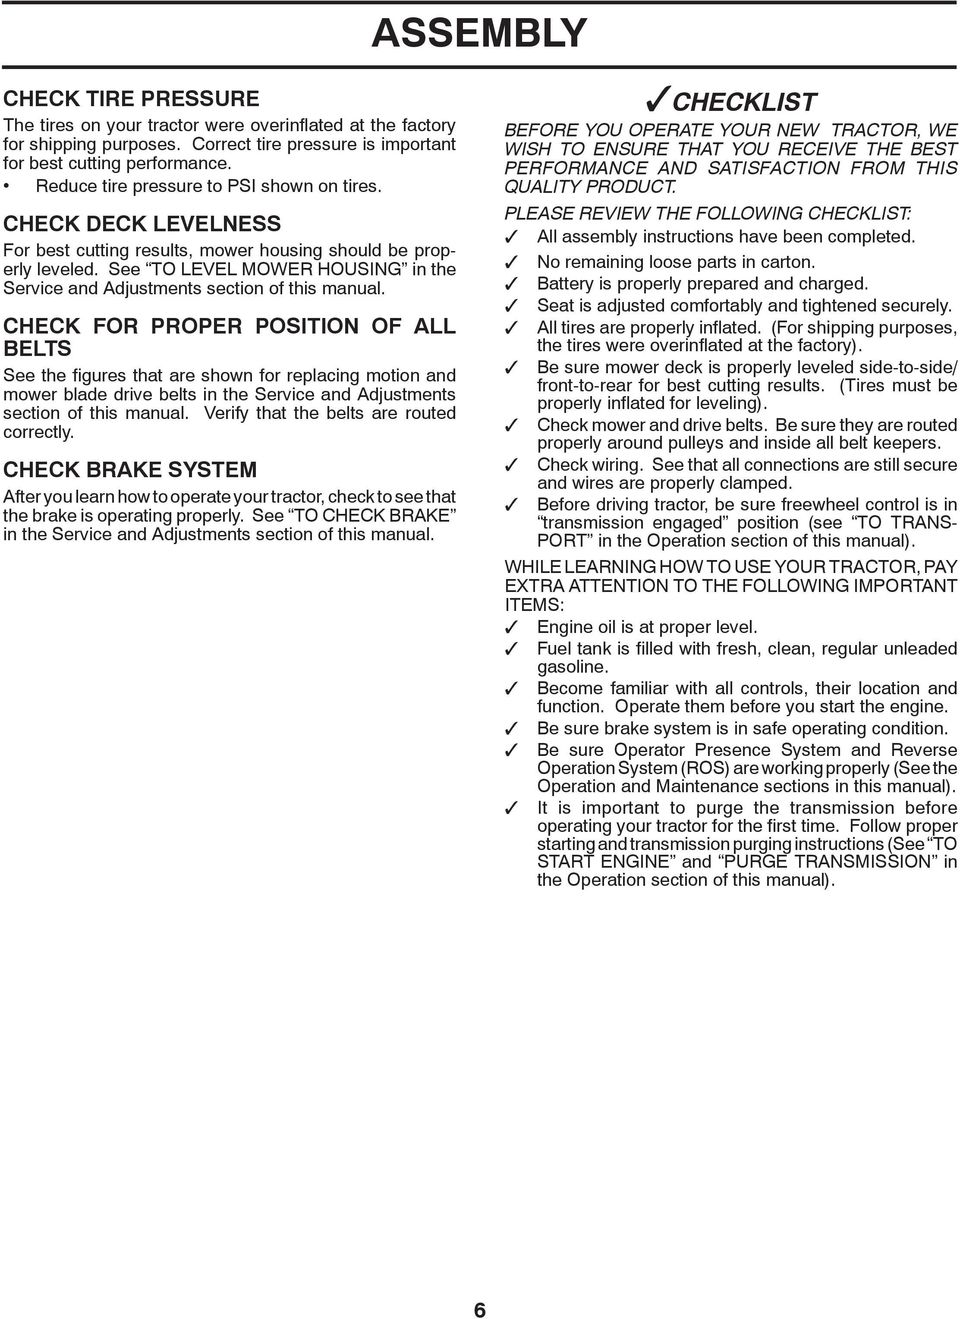 See TO LEVEL MOWER HOUSING in the Service and Adjustments section of this manual.